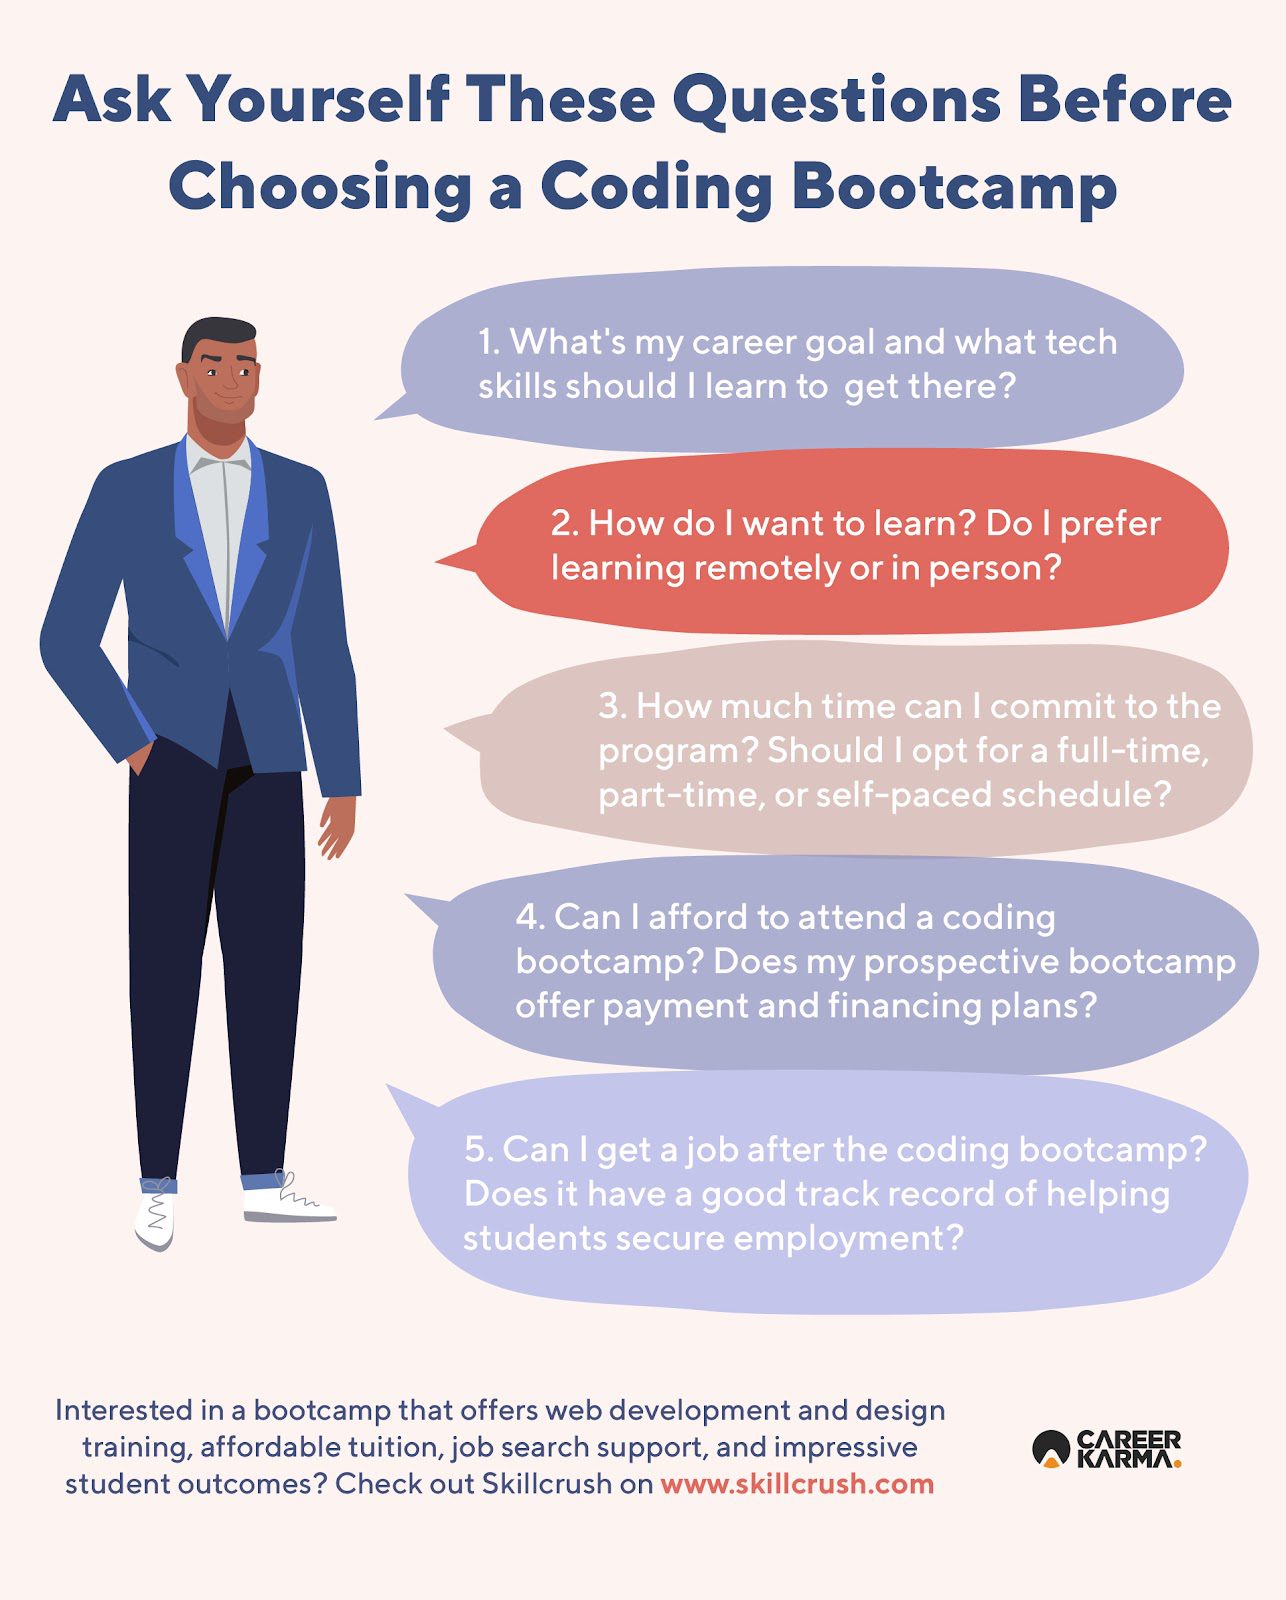 An infographic listing the five questions you must answer when choosing a coding bootcamp